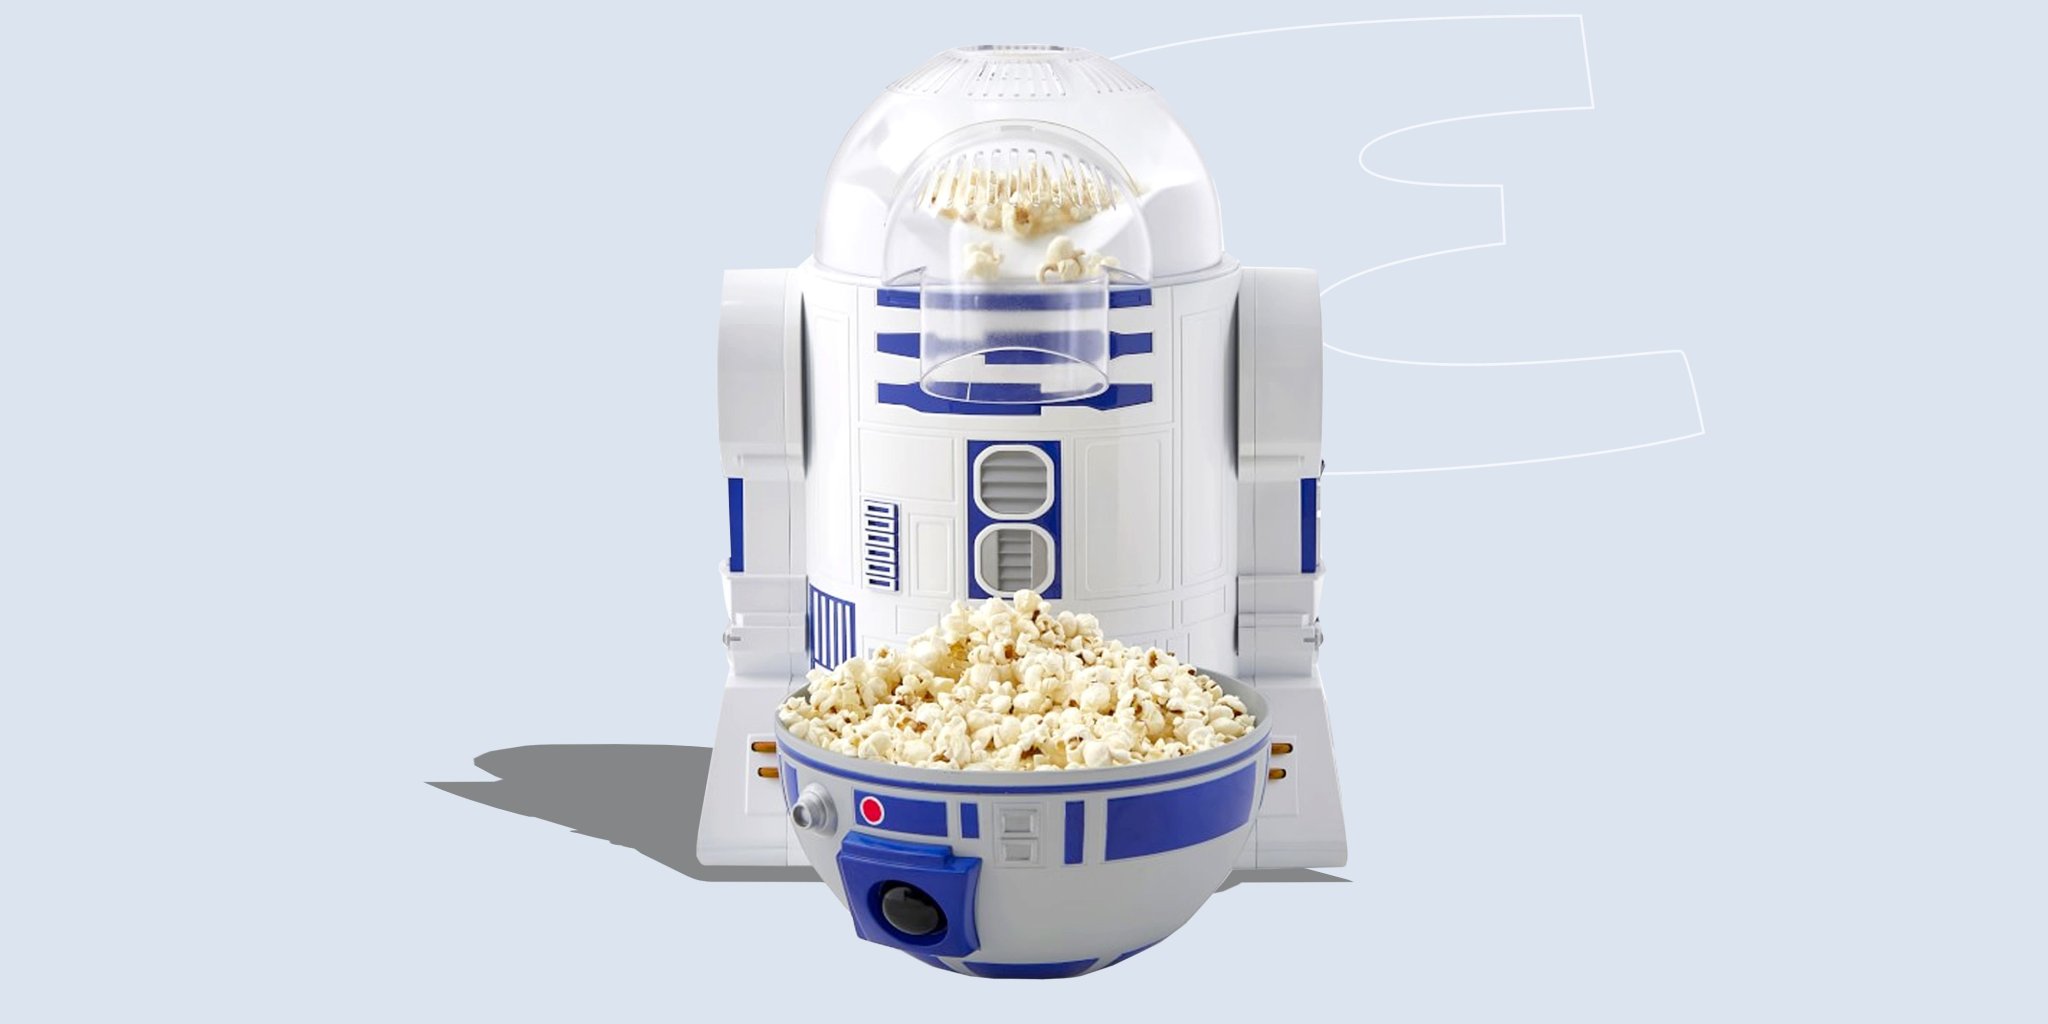 50 Best Star Wars Gifts That Are Out-of-This-Galaxy Cool